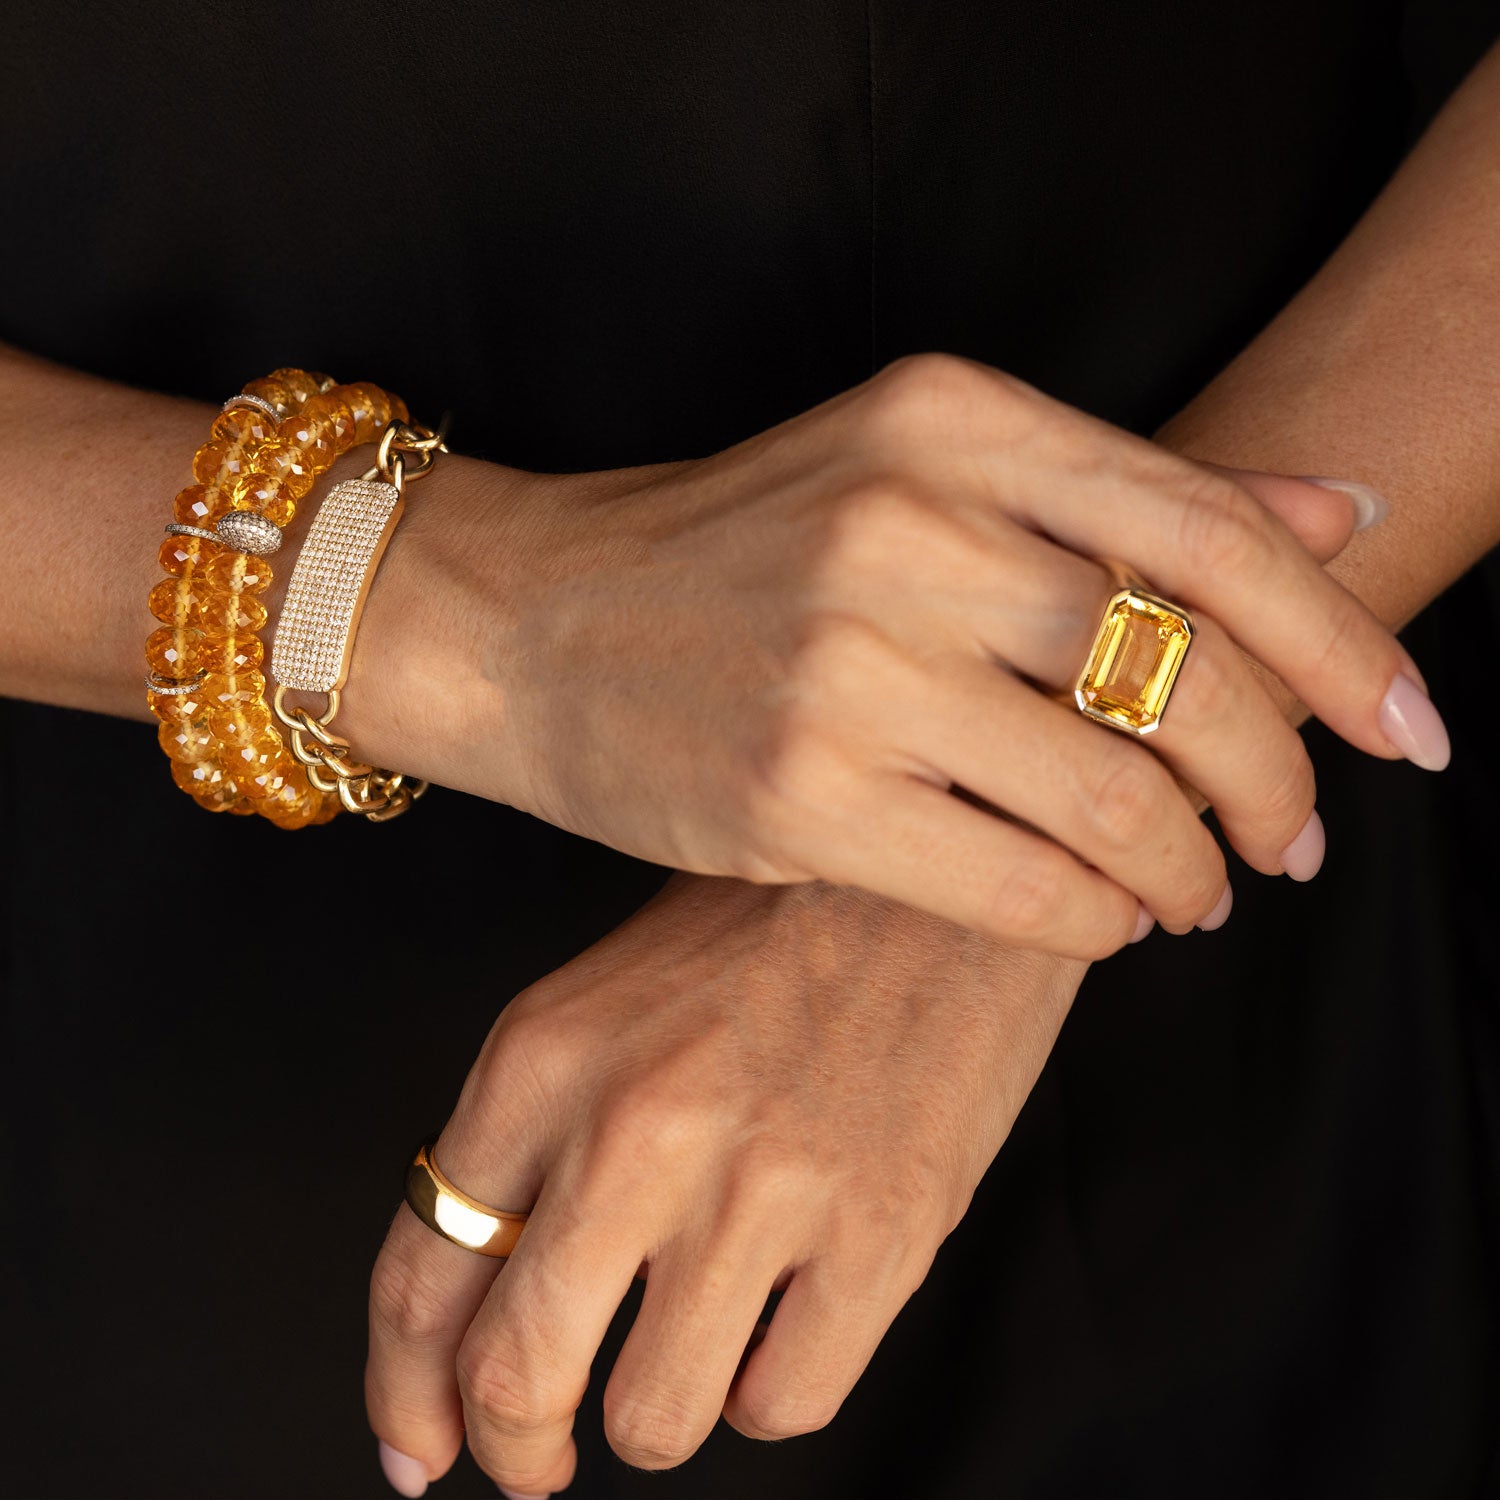 Three Sheryl Lowe bracelets (2 citrine bead bracelets and a 14k gold and diamond ID bracelet) stacked on a woman's wrist and a citrine and 14K gold cocktail ring on her middle finger.